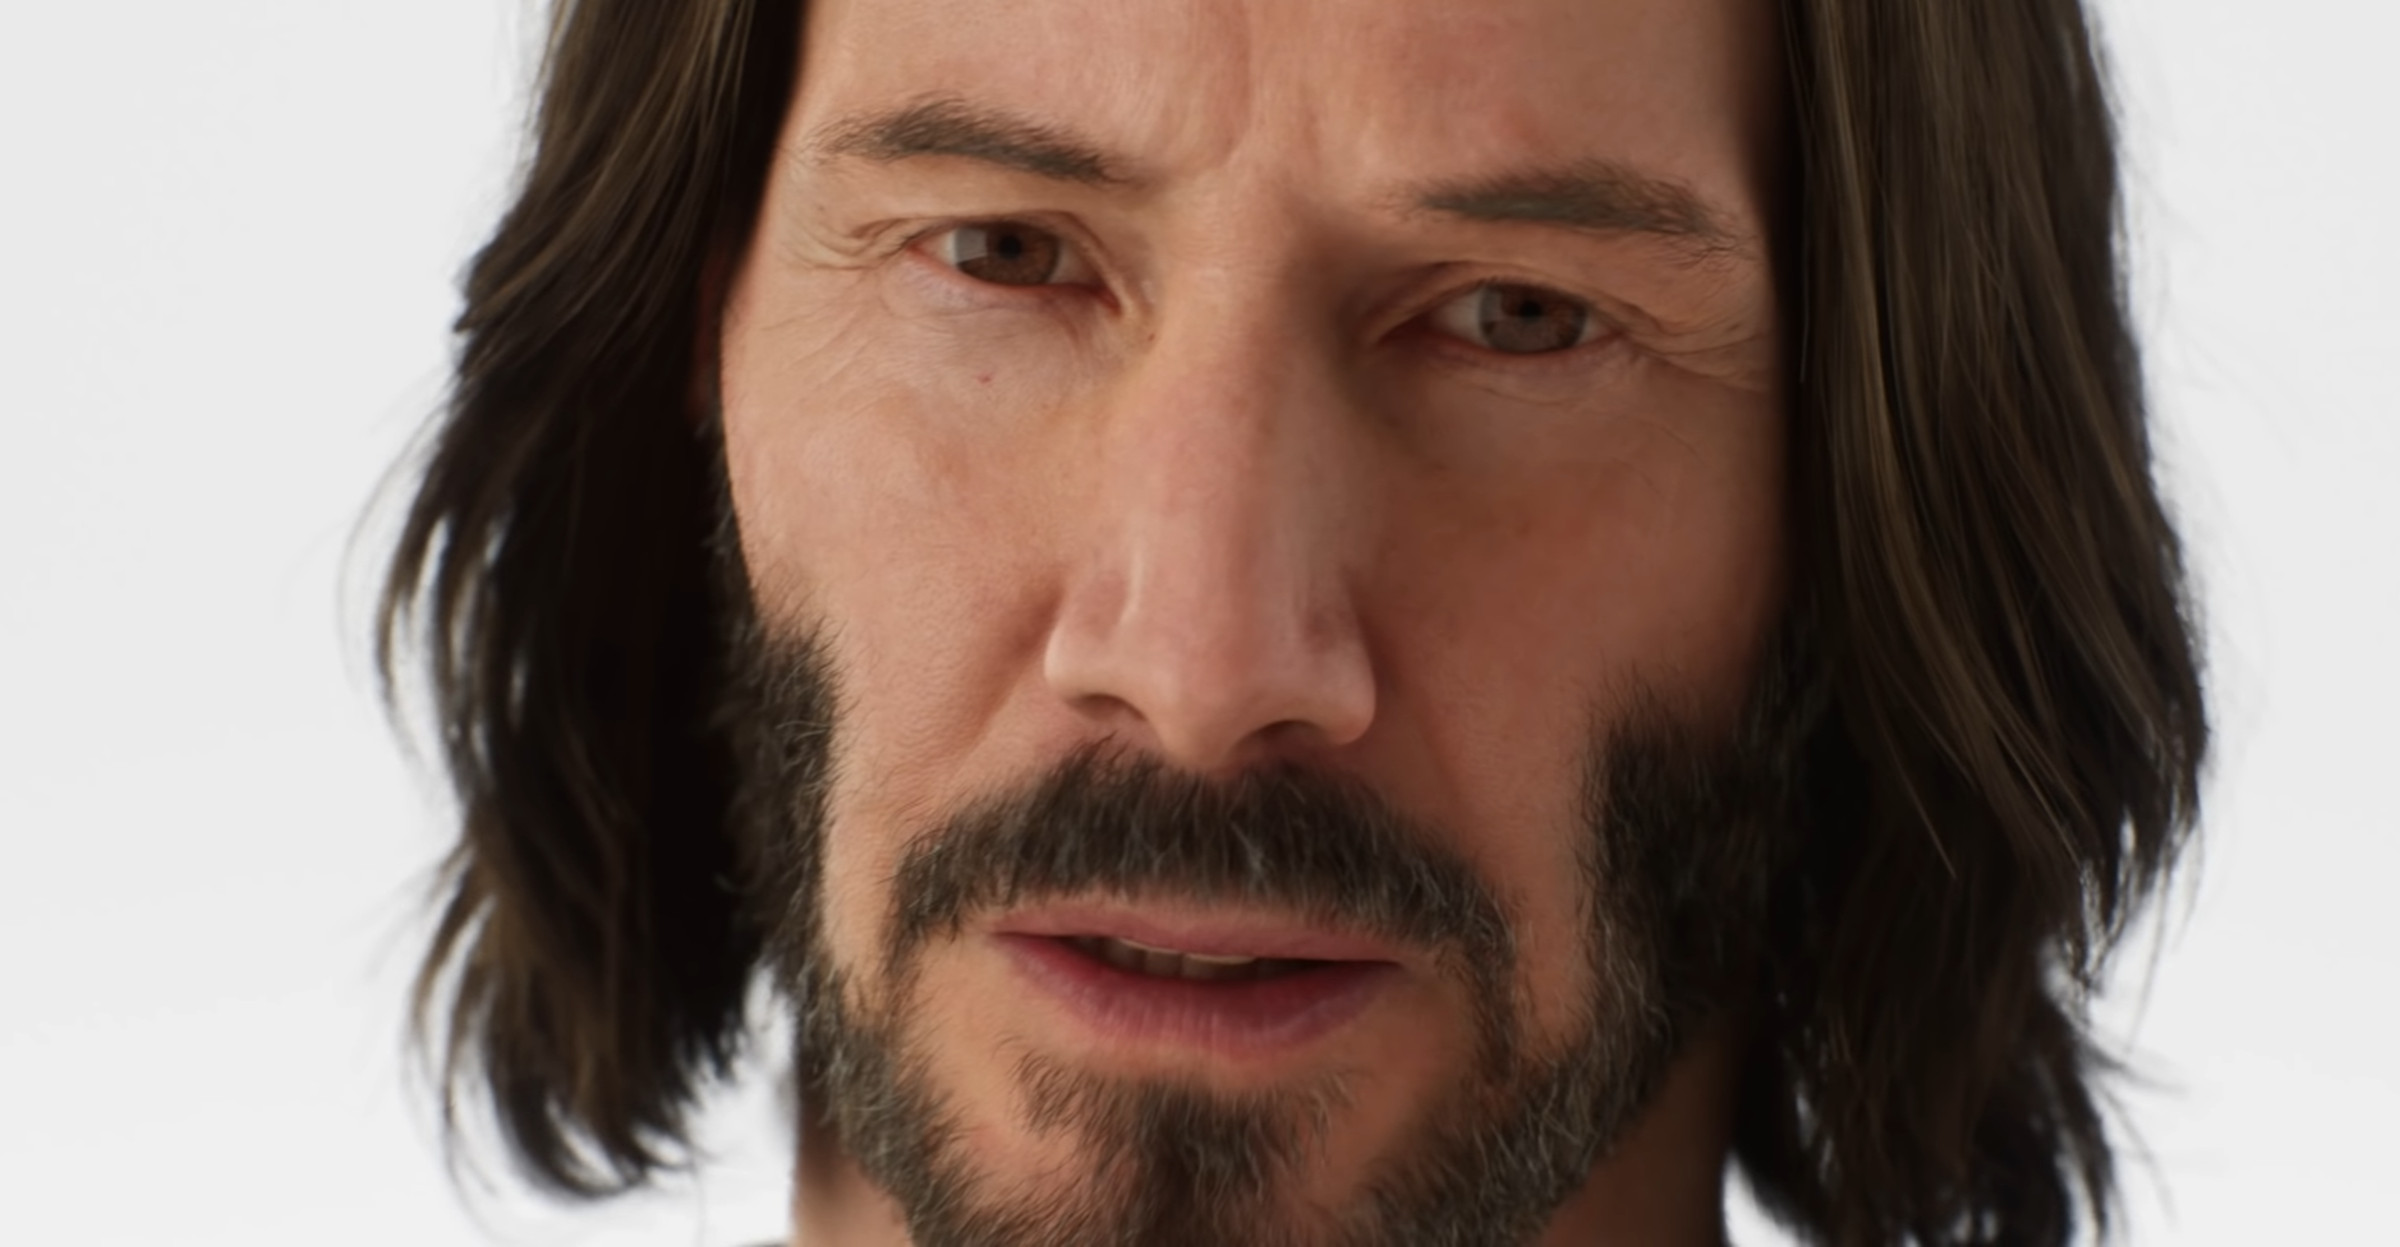 Is this another digital Keanu Reeves?